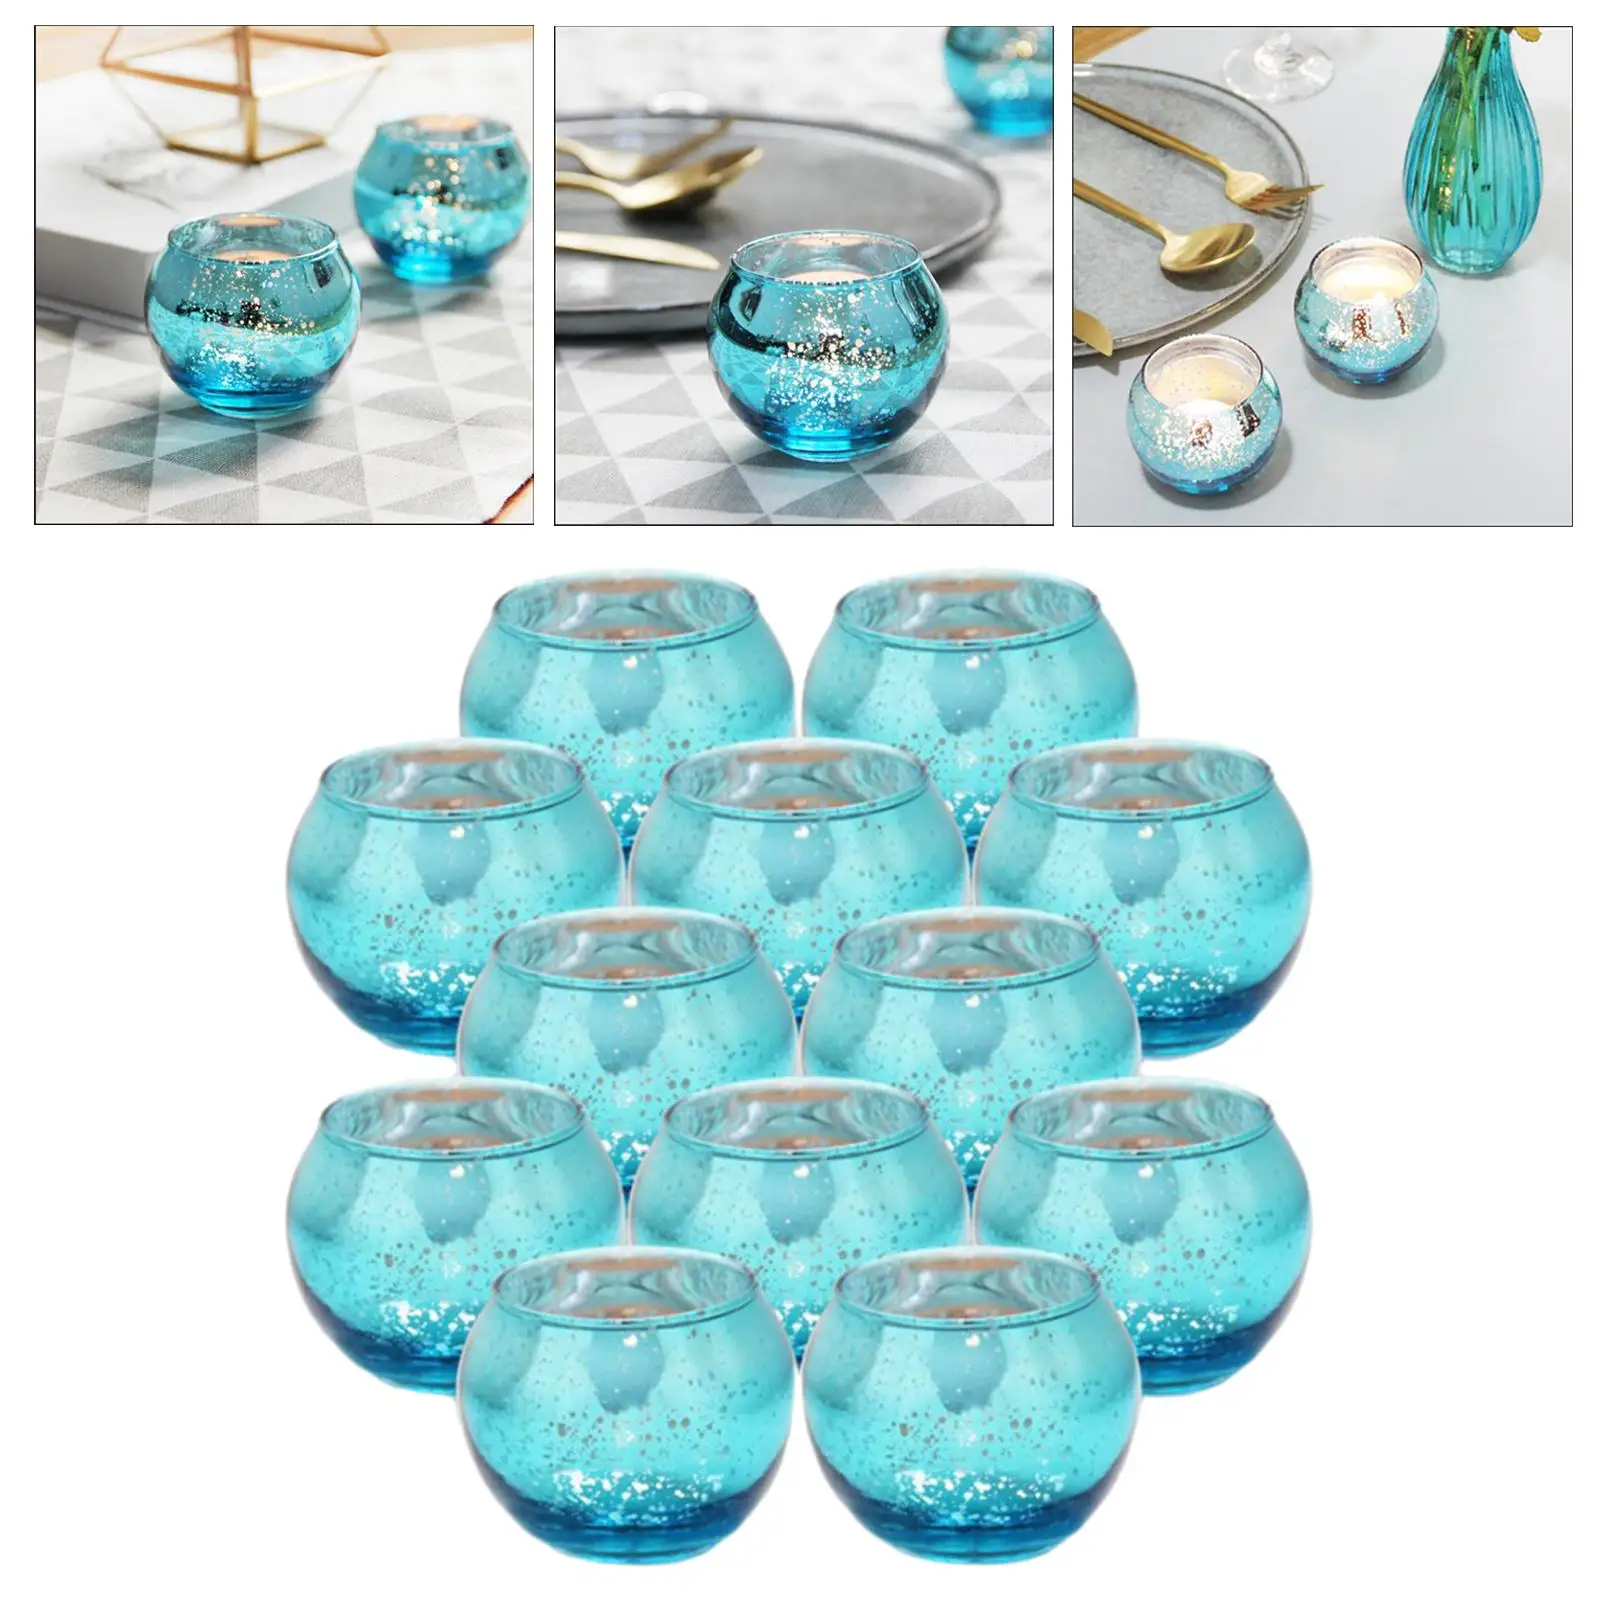 12Pcs Round Mercury Glass Votive Candle Holders for Wedding Centerpieces, Valentines Dinner, Garden Tub and Any Theme Events